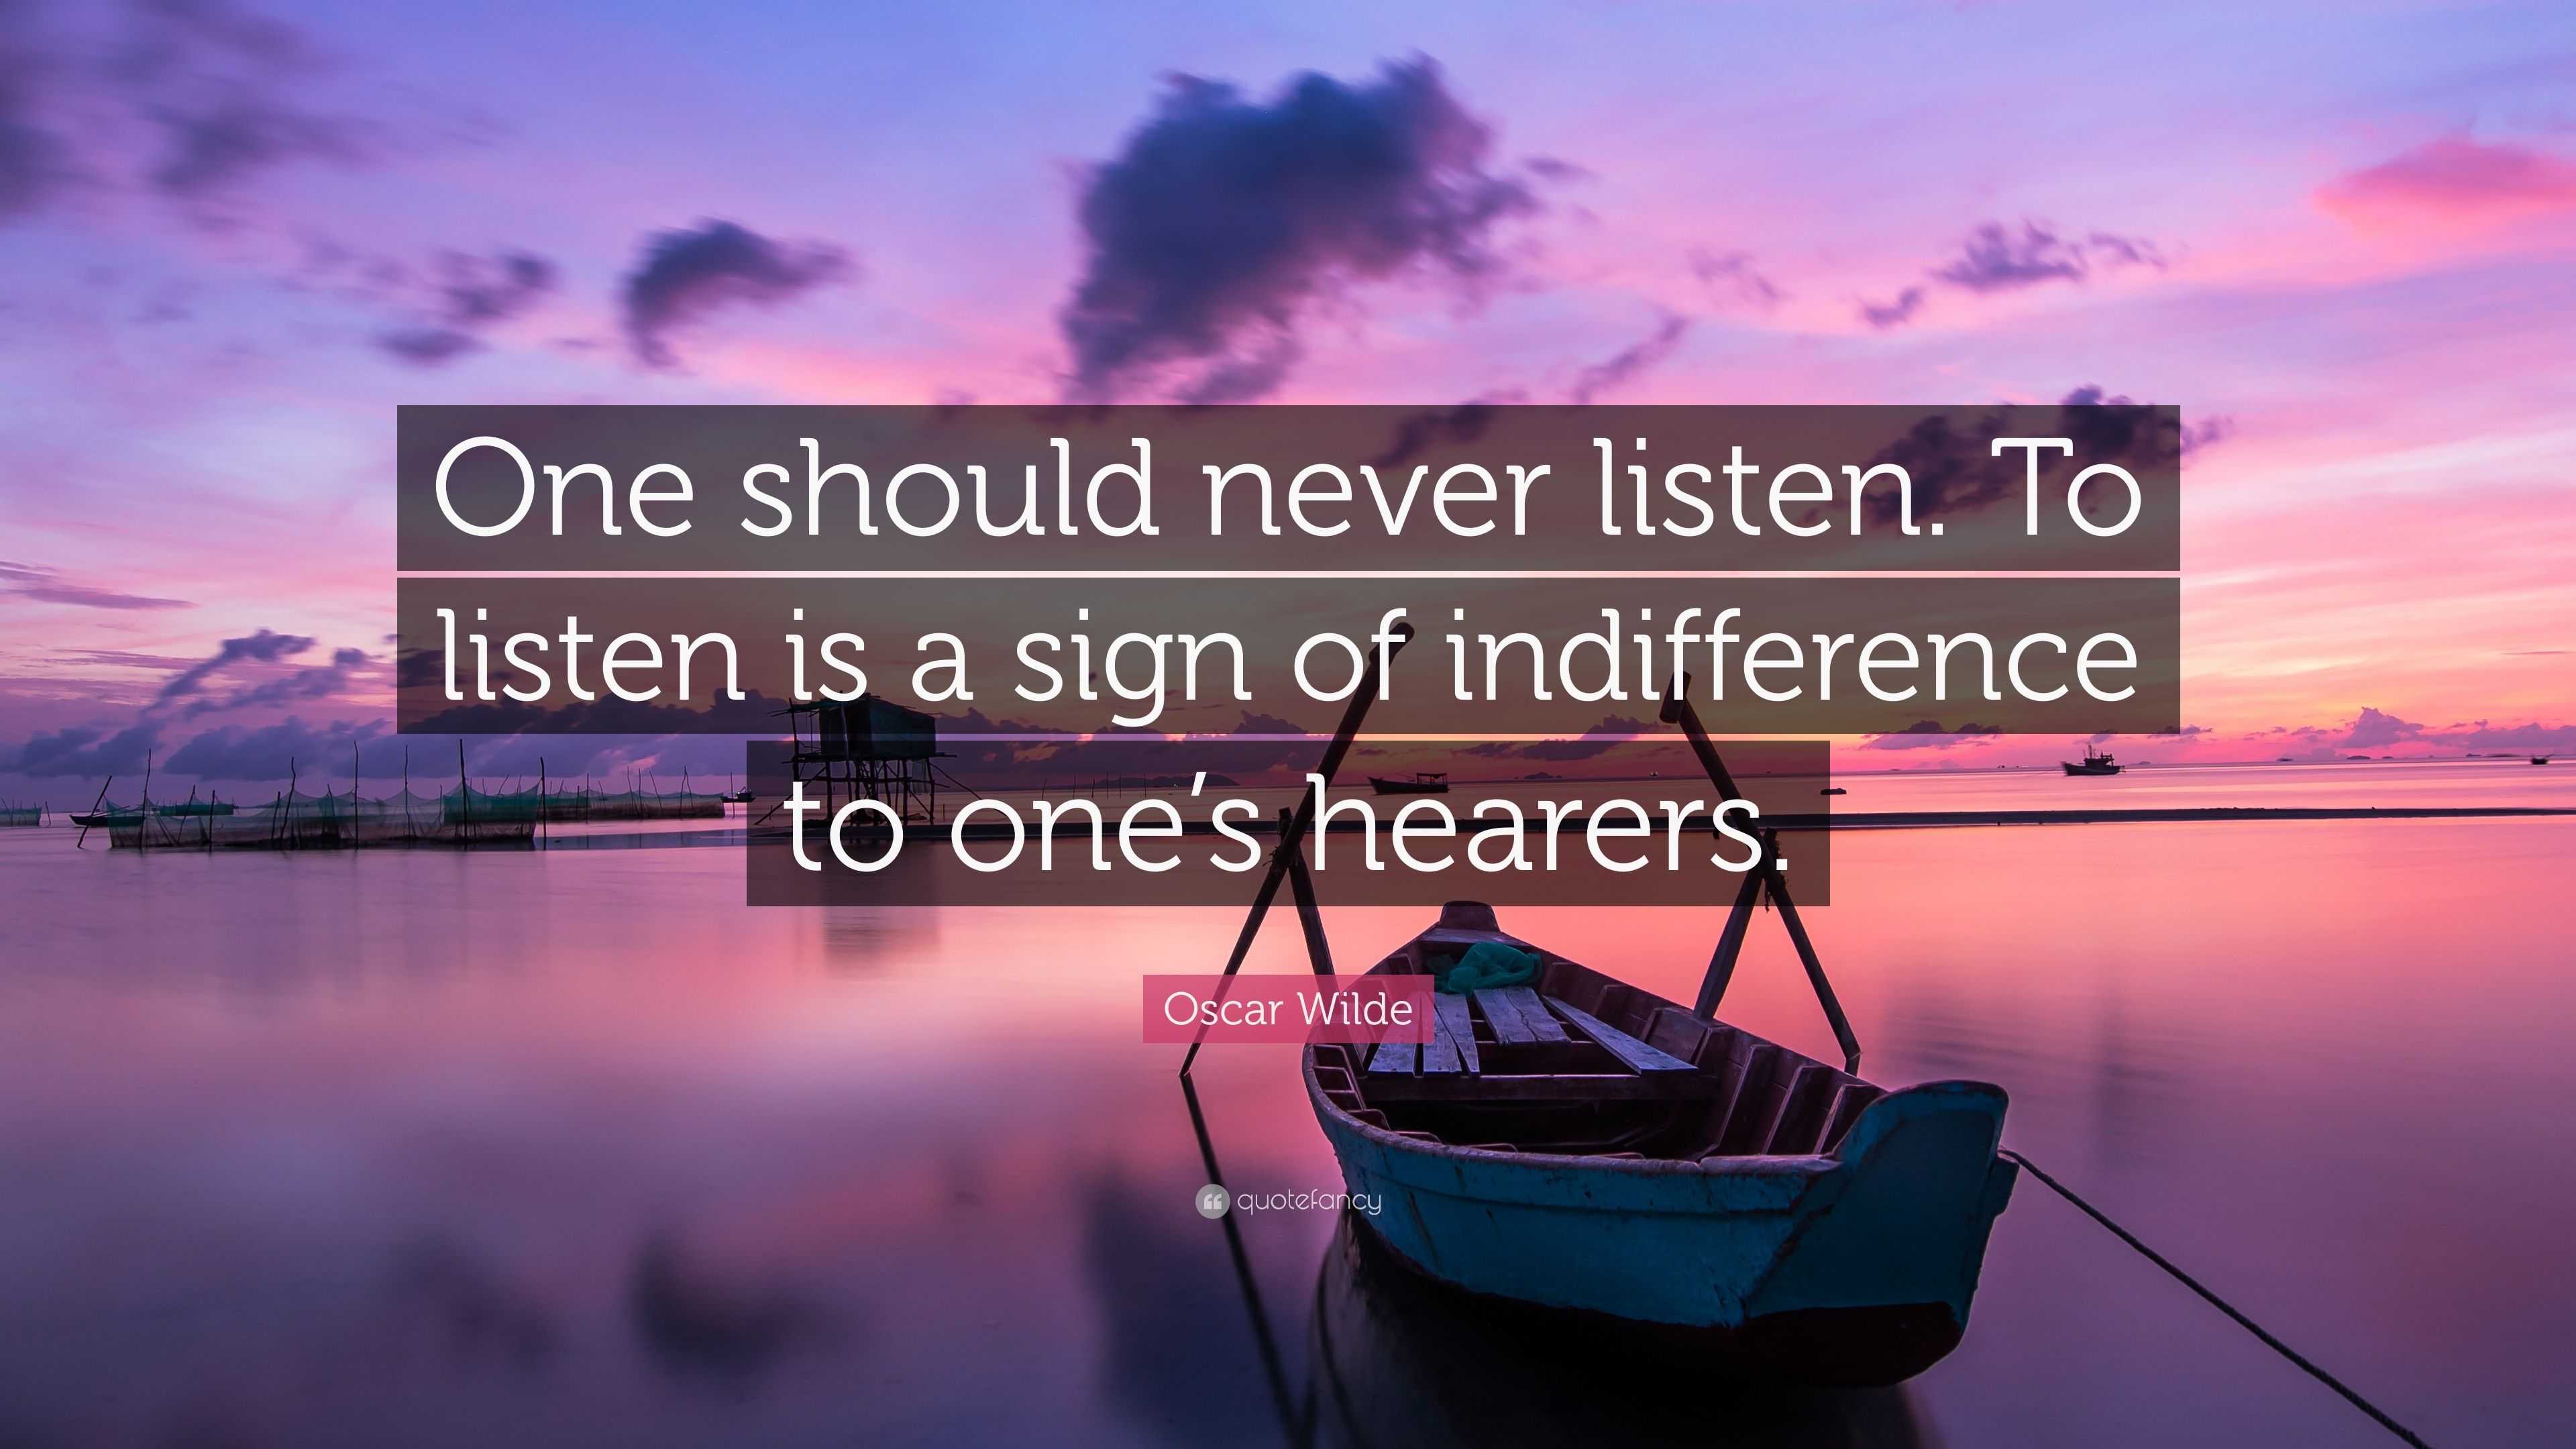 Oscar Wilde Quote: “One should never listen. To listen is a sign of ...